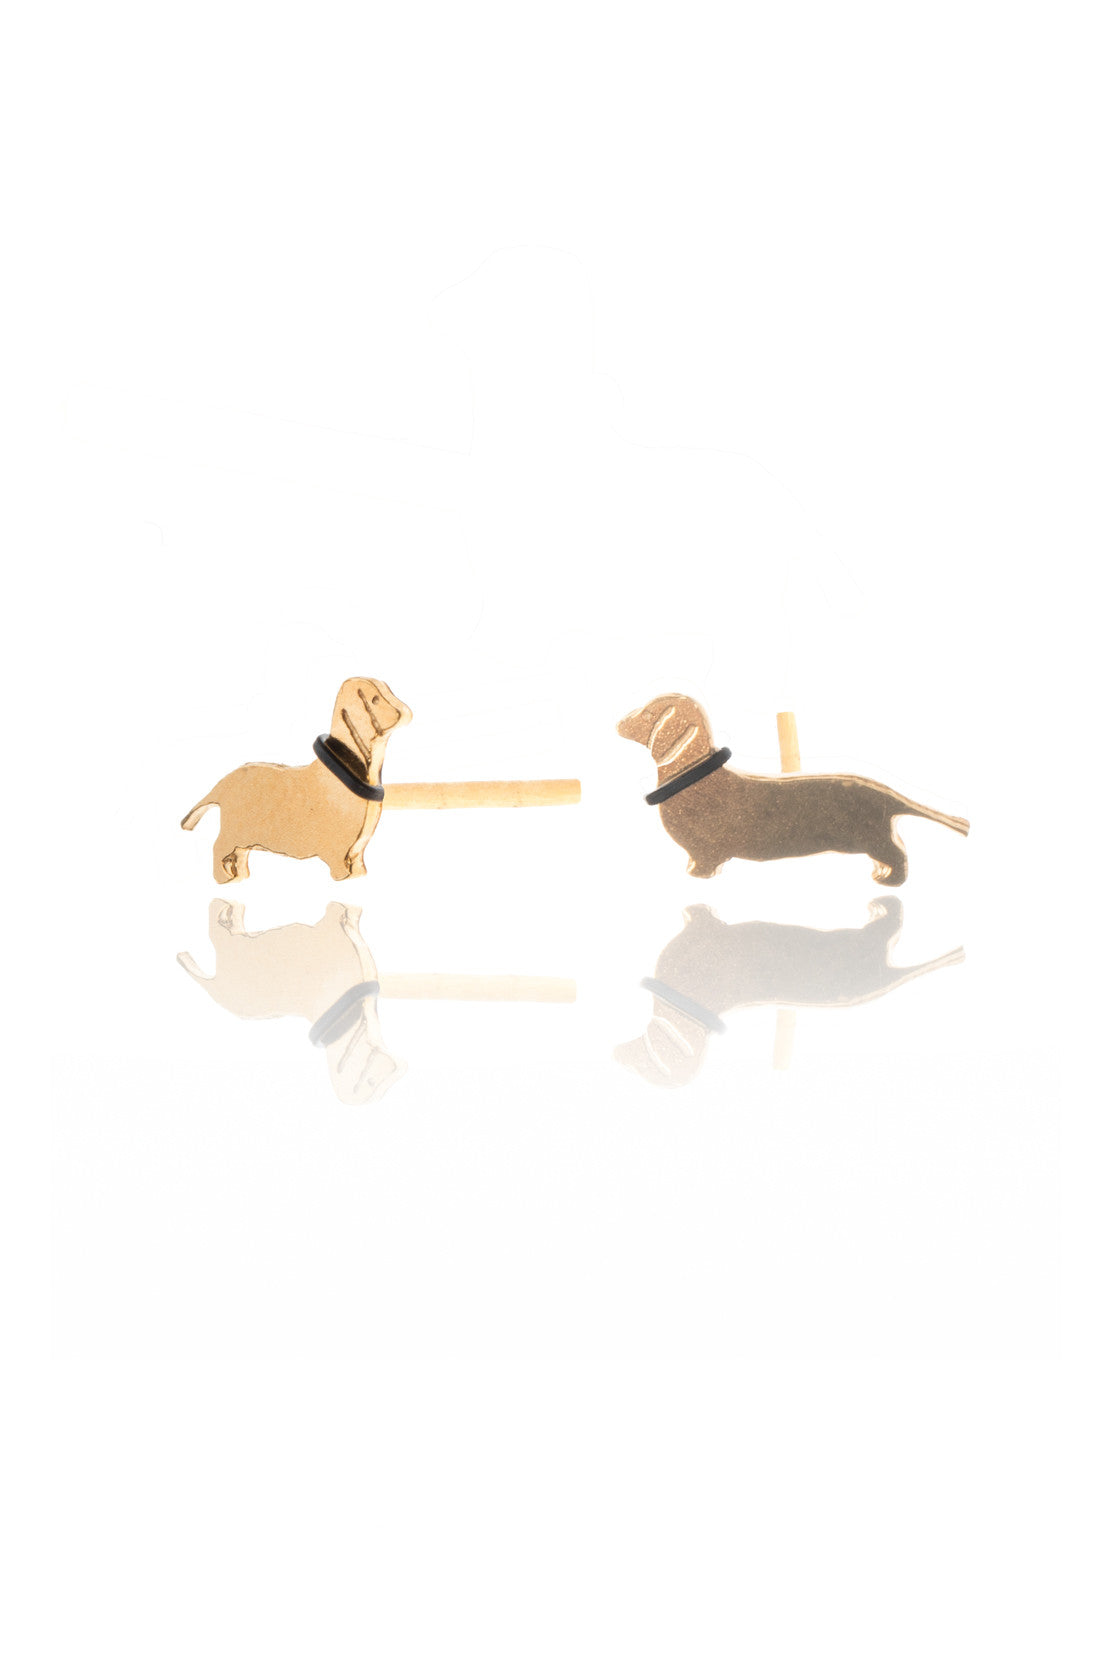 22ct gold stud earrings with dog wearing a collar